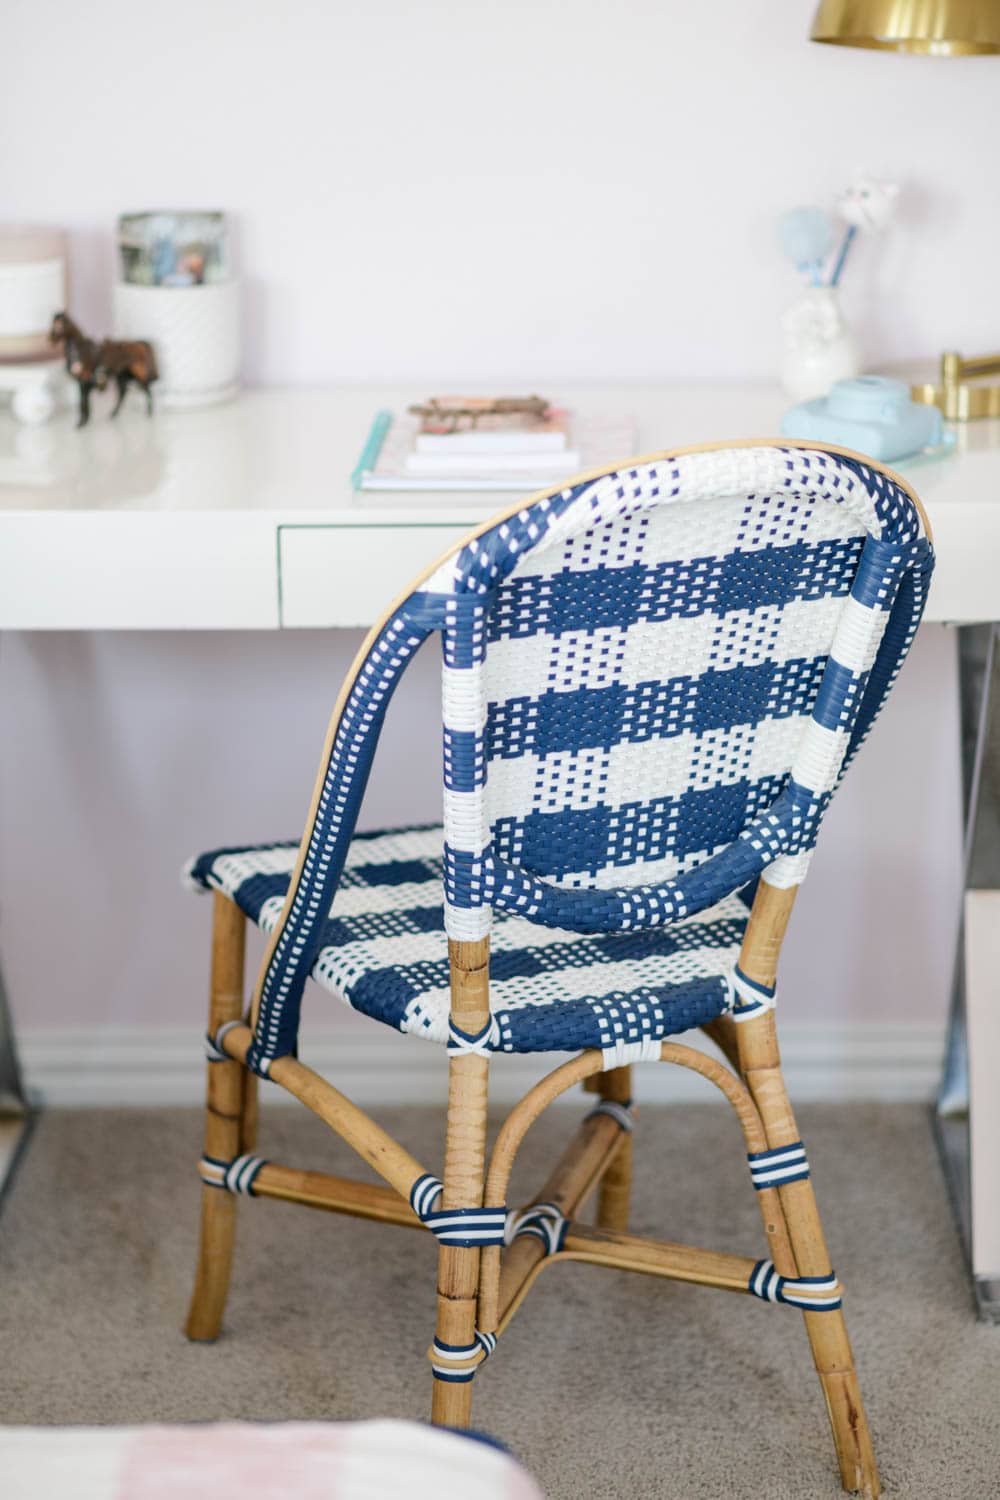 Blue and white checkered rattan chair in a tween bedroom for a desk chair